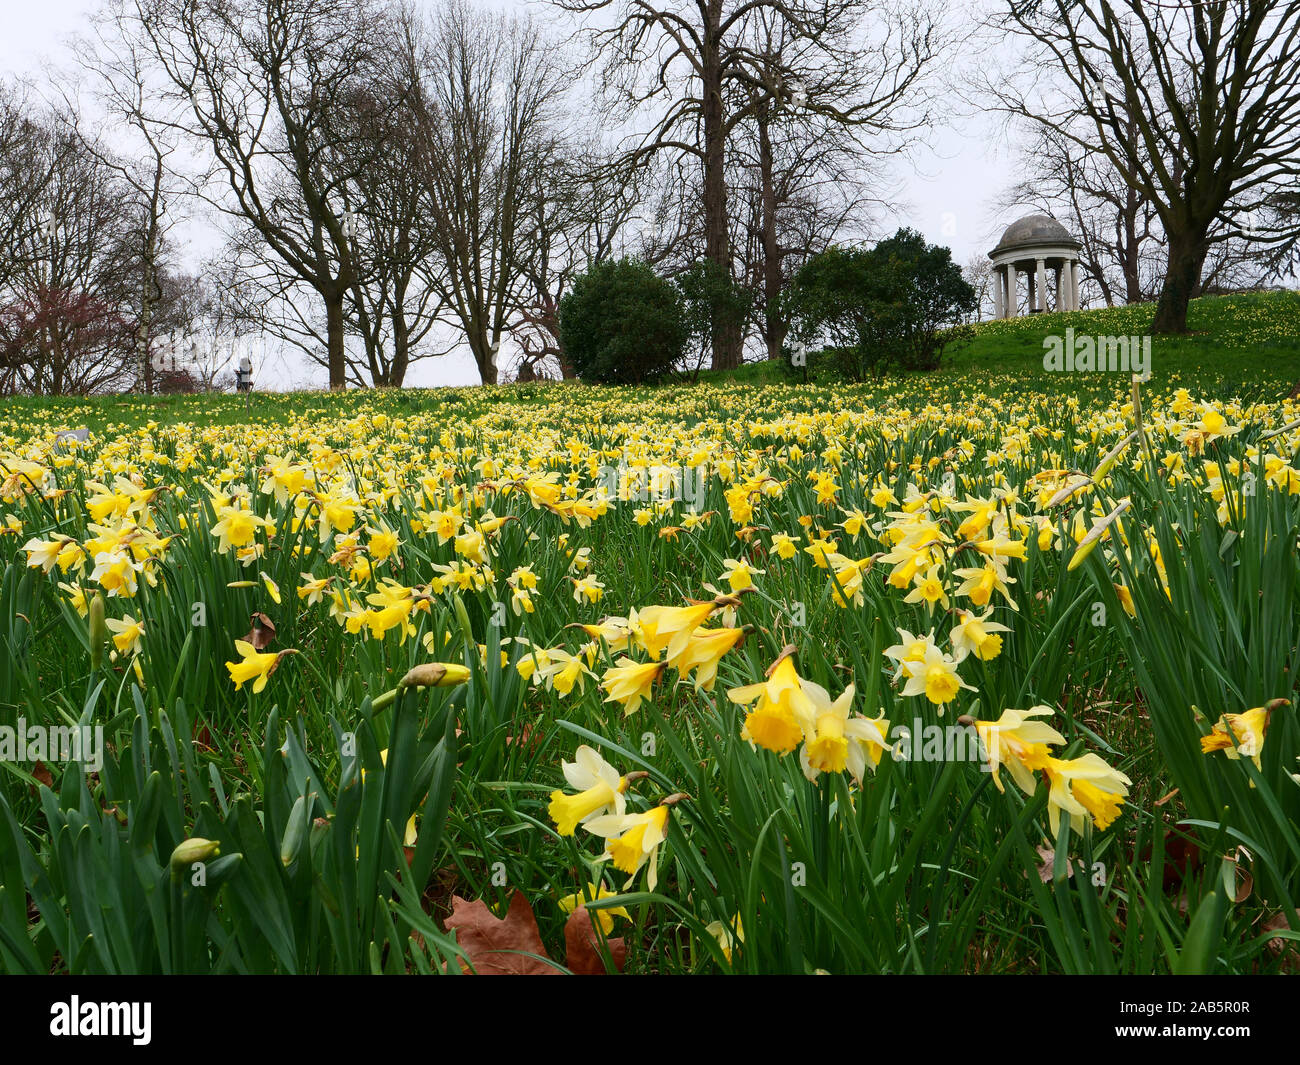 Many daffodils are seen growing semi wild on the slopes towards the temple of Eolus in an historic part of Kew Gardens, Richmond, London, in spring. Stock Photo